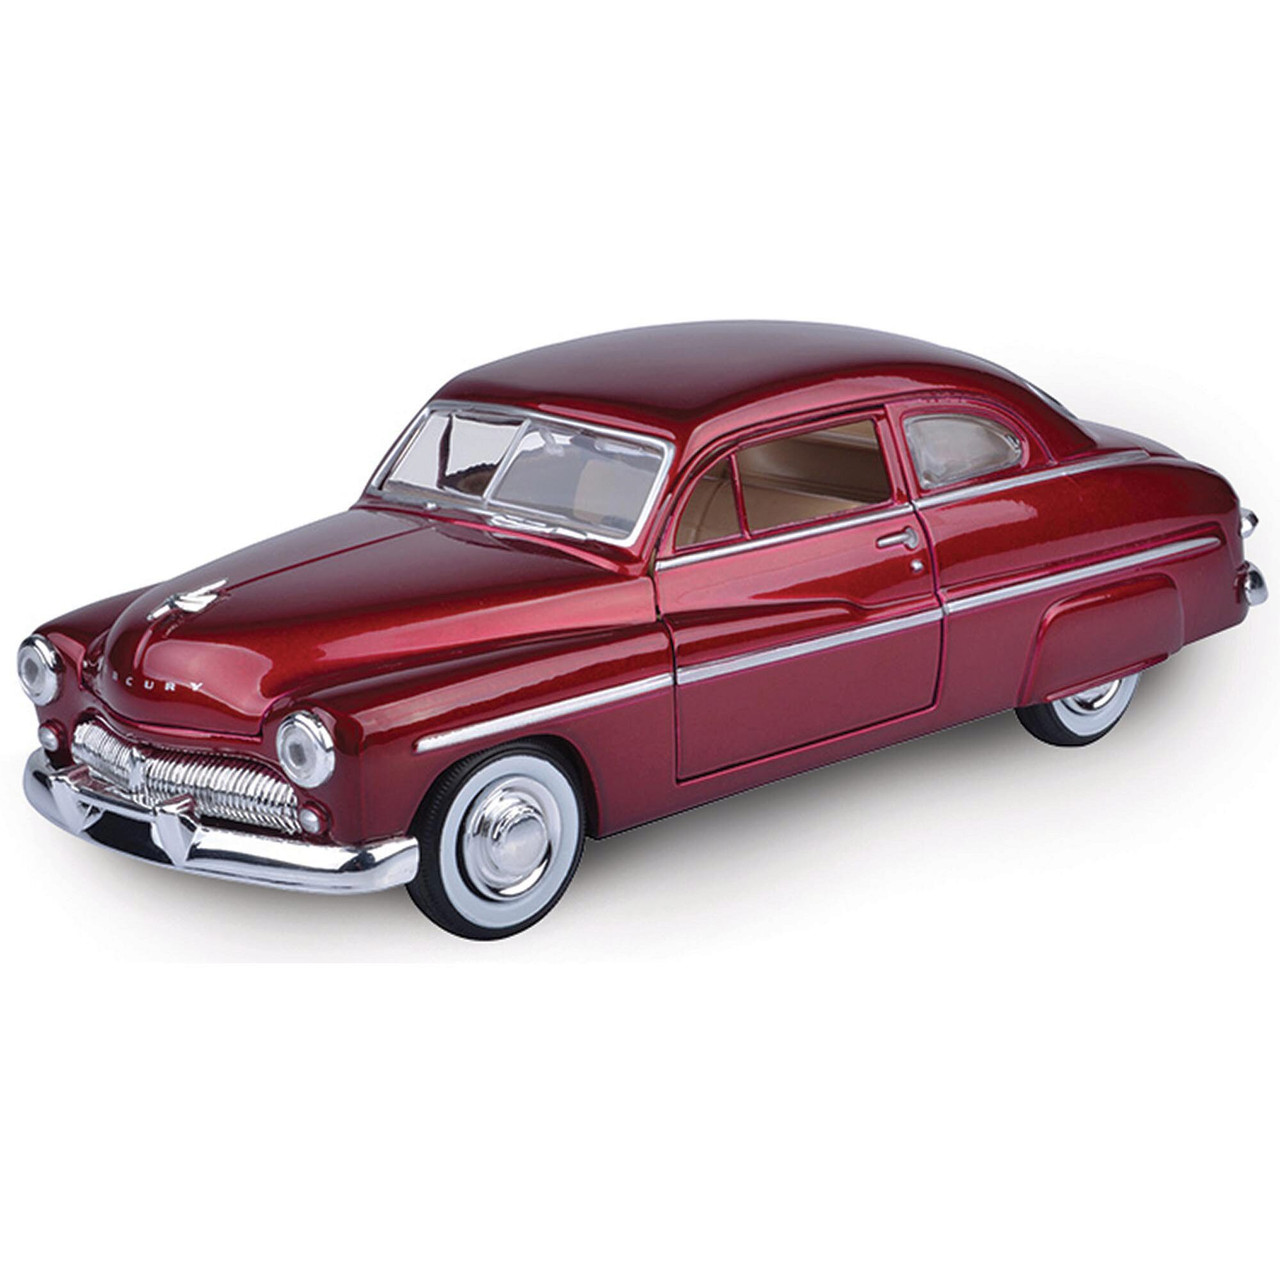 Details about   1949 Mercury Sedan Vintage Die-Cast Collectible w/ Display Stand 1:60 Scale 